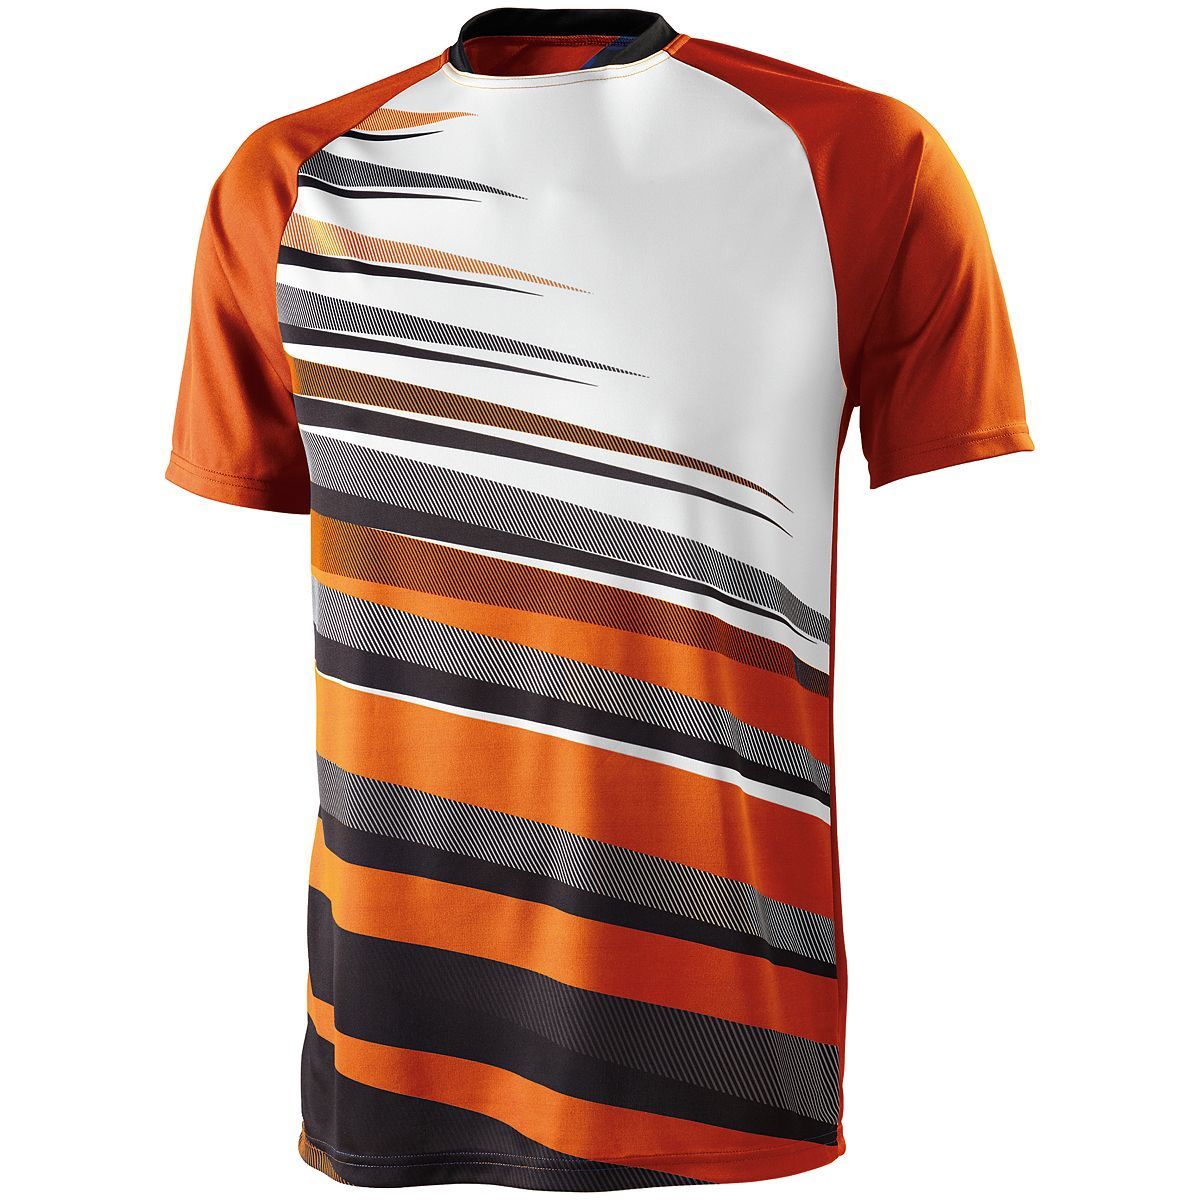 High 5 Adult Galactic Jersey in Orange/Black/White  -Part of the Adult, Adult-Jersey, High5-Products, Soccer, Shirts, All-Sports-1 product lines at KanaleyCreations.com